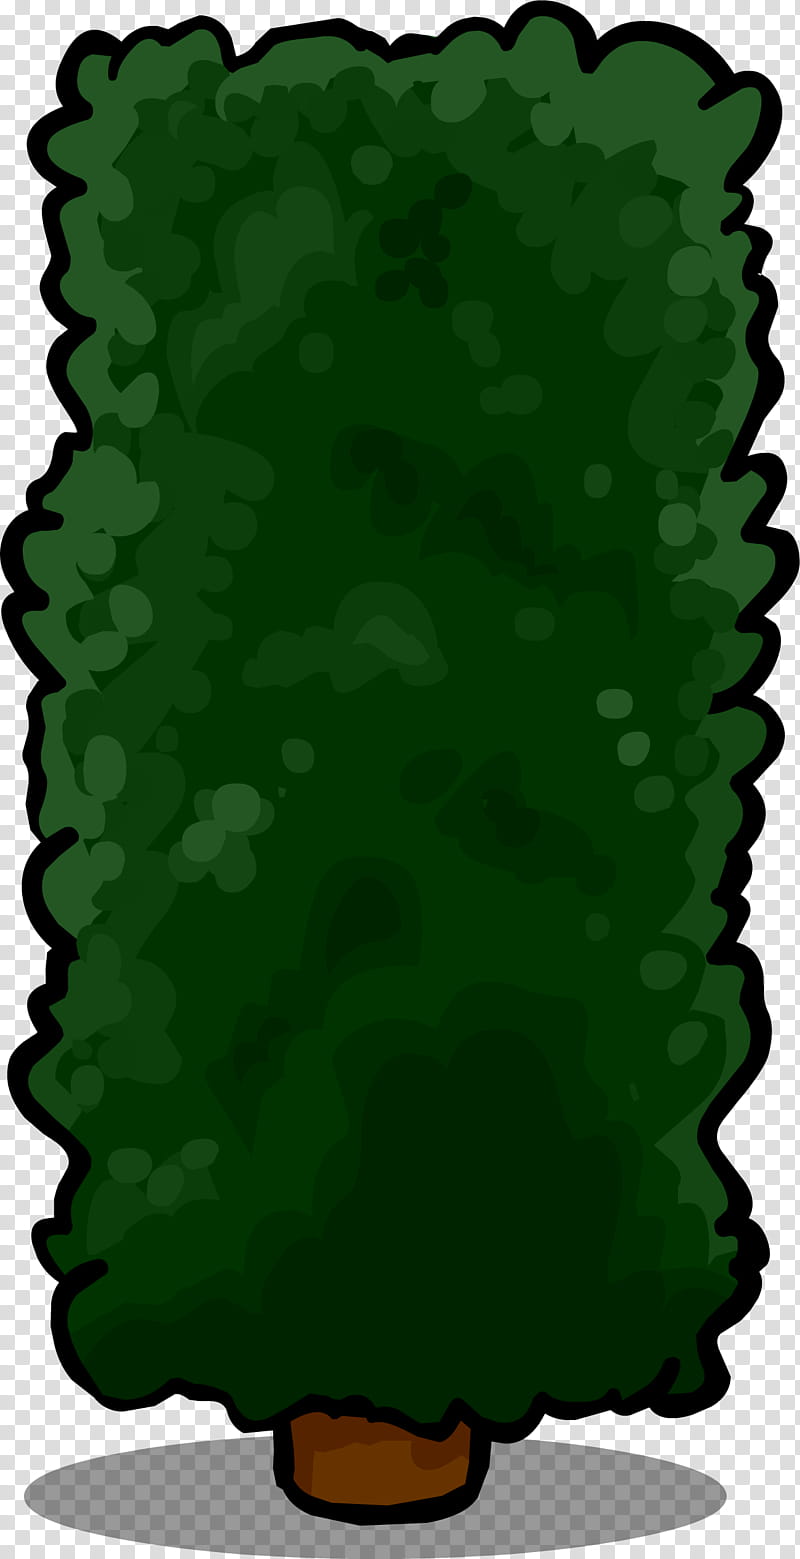 Green Leaf, Tree, Hedge, Shrub, Garden, Plants, Topiary, Buxus Sempervirens transparent background PNG clipart